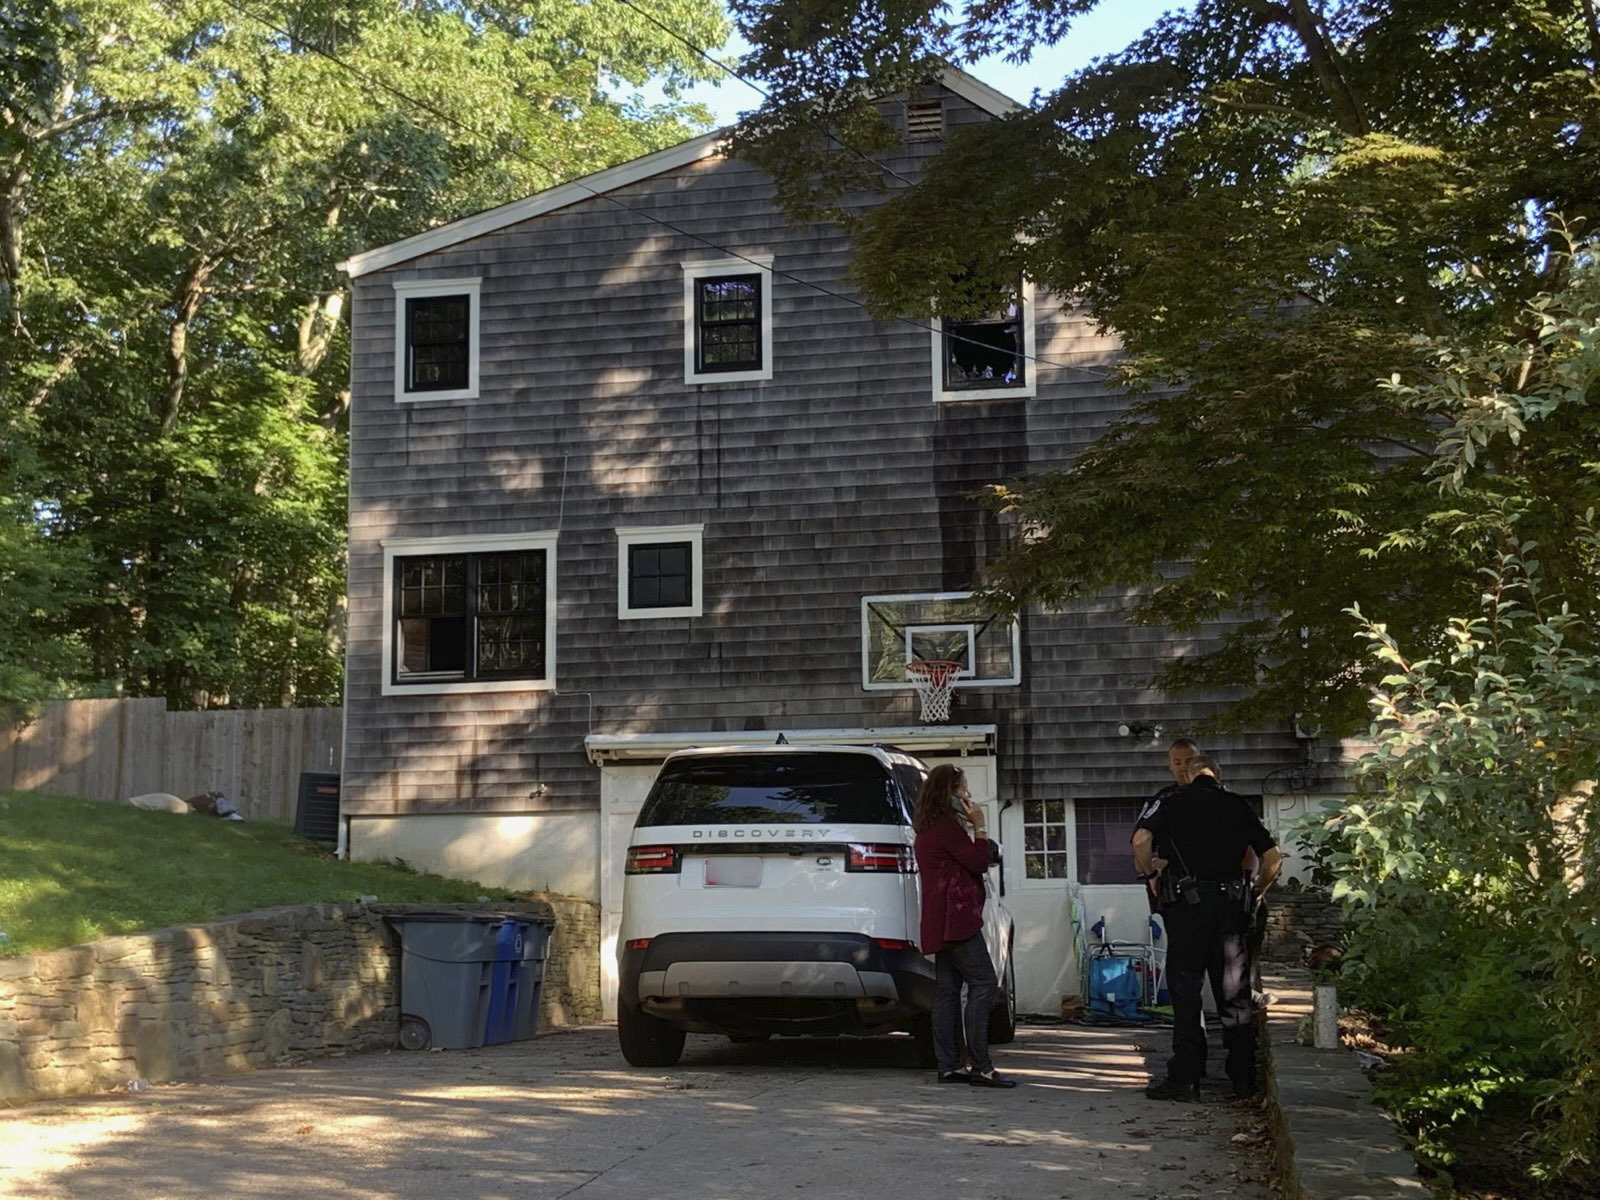 Fire investigators are focusing on an outdoor grilling area as the likely source of the fire that killed two sisters from Maryland in a late night fire earlier this month at the house their family was renting.    STEPHEN J. KOTZ